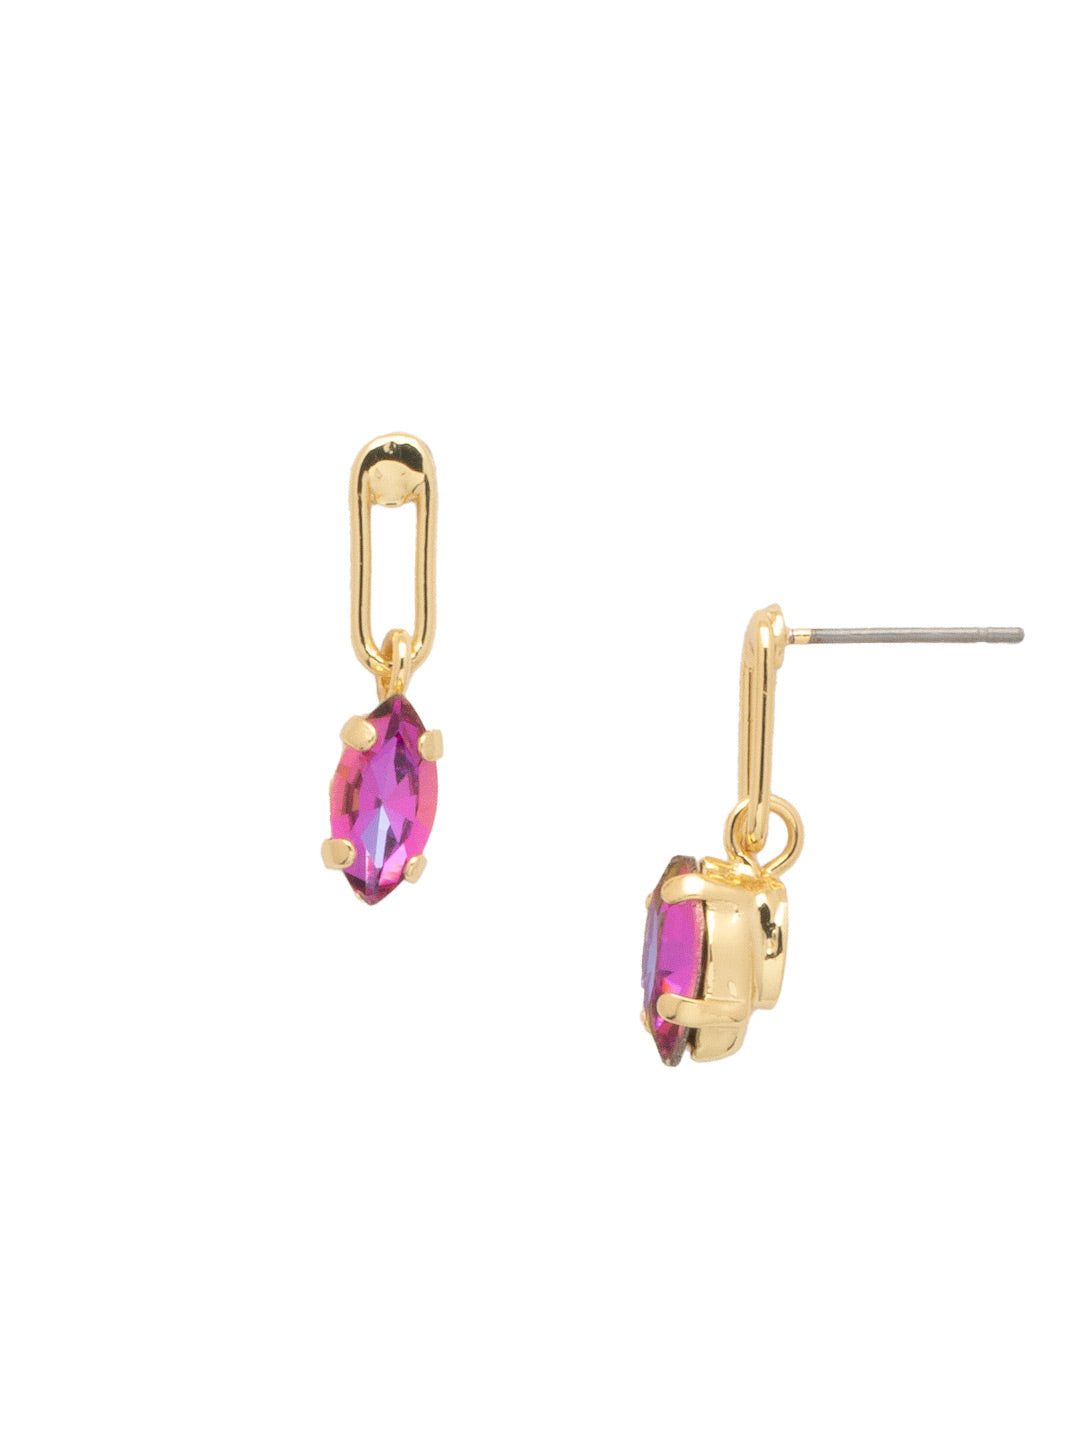 Clarissa Chain Link Dangle Earrings - EFL66BGFIS - <p>The Clarissa Chain Link Dangle Earrings feature a navette cut crystal dangling from a single chain link on a post. From Sorrelli's Fireside collection in our Bright Gold-tone finish.</p>